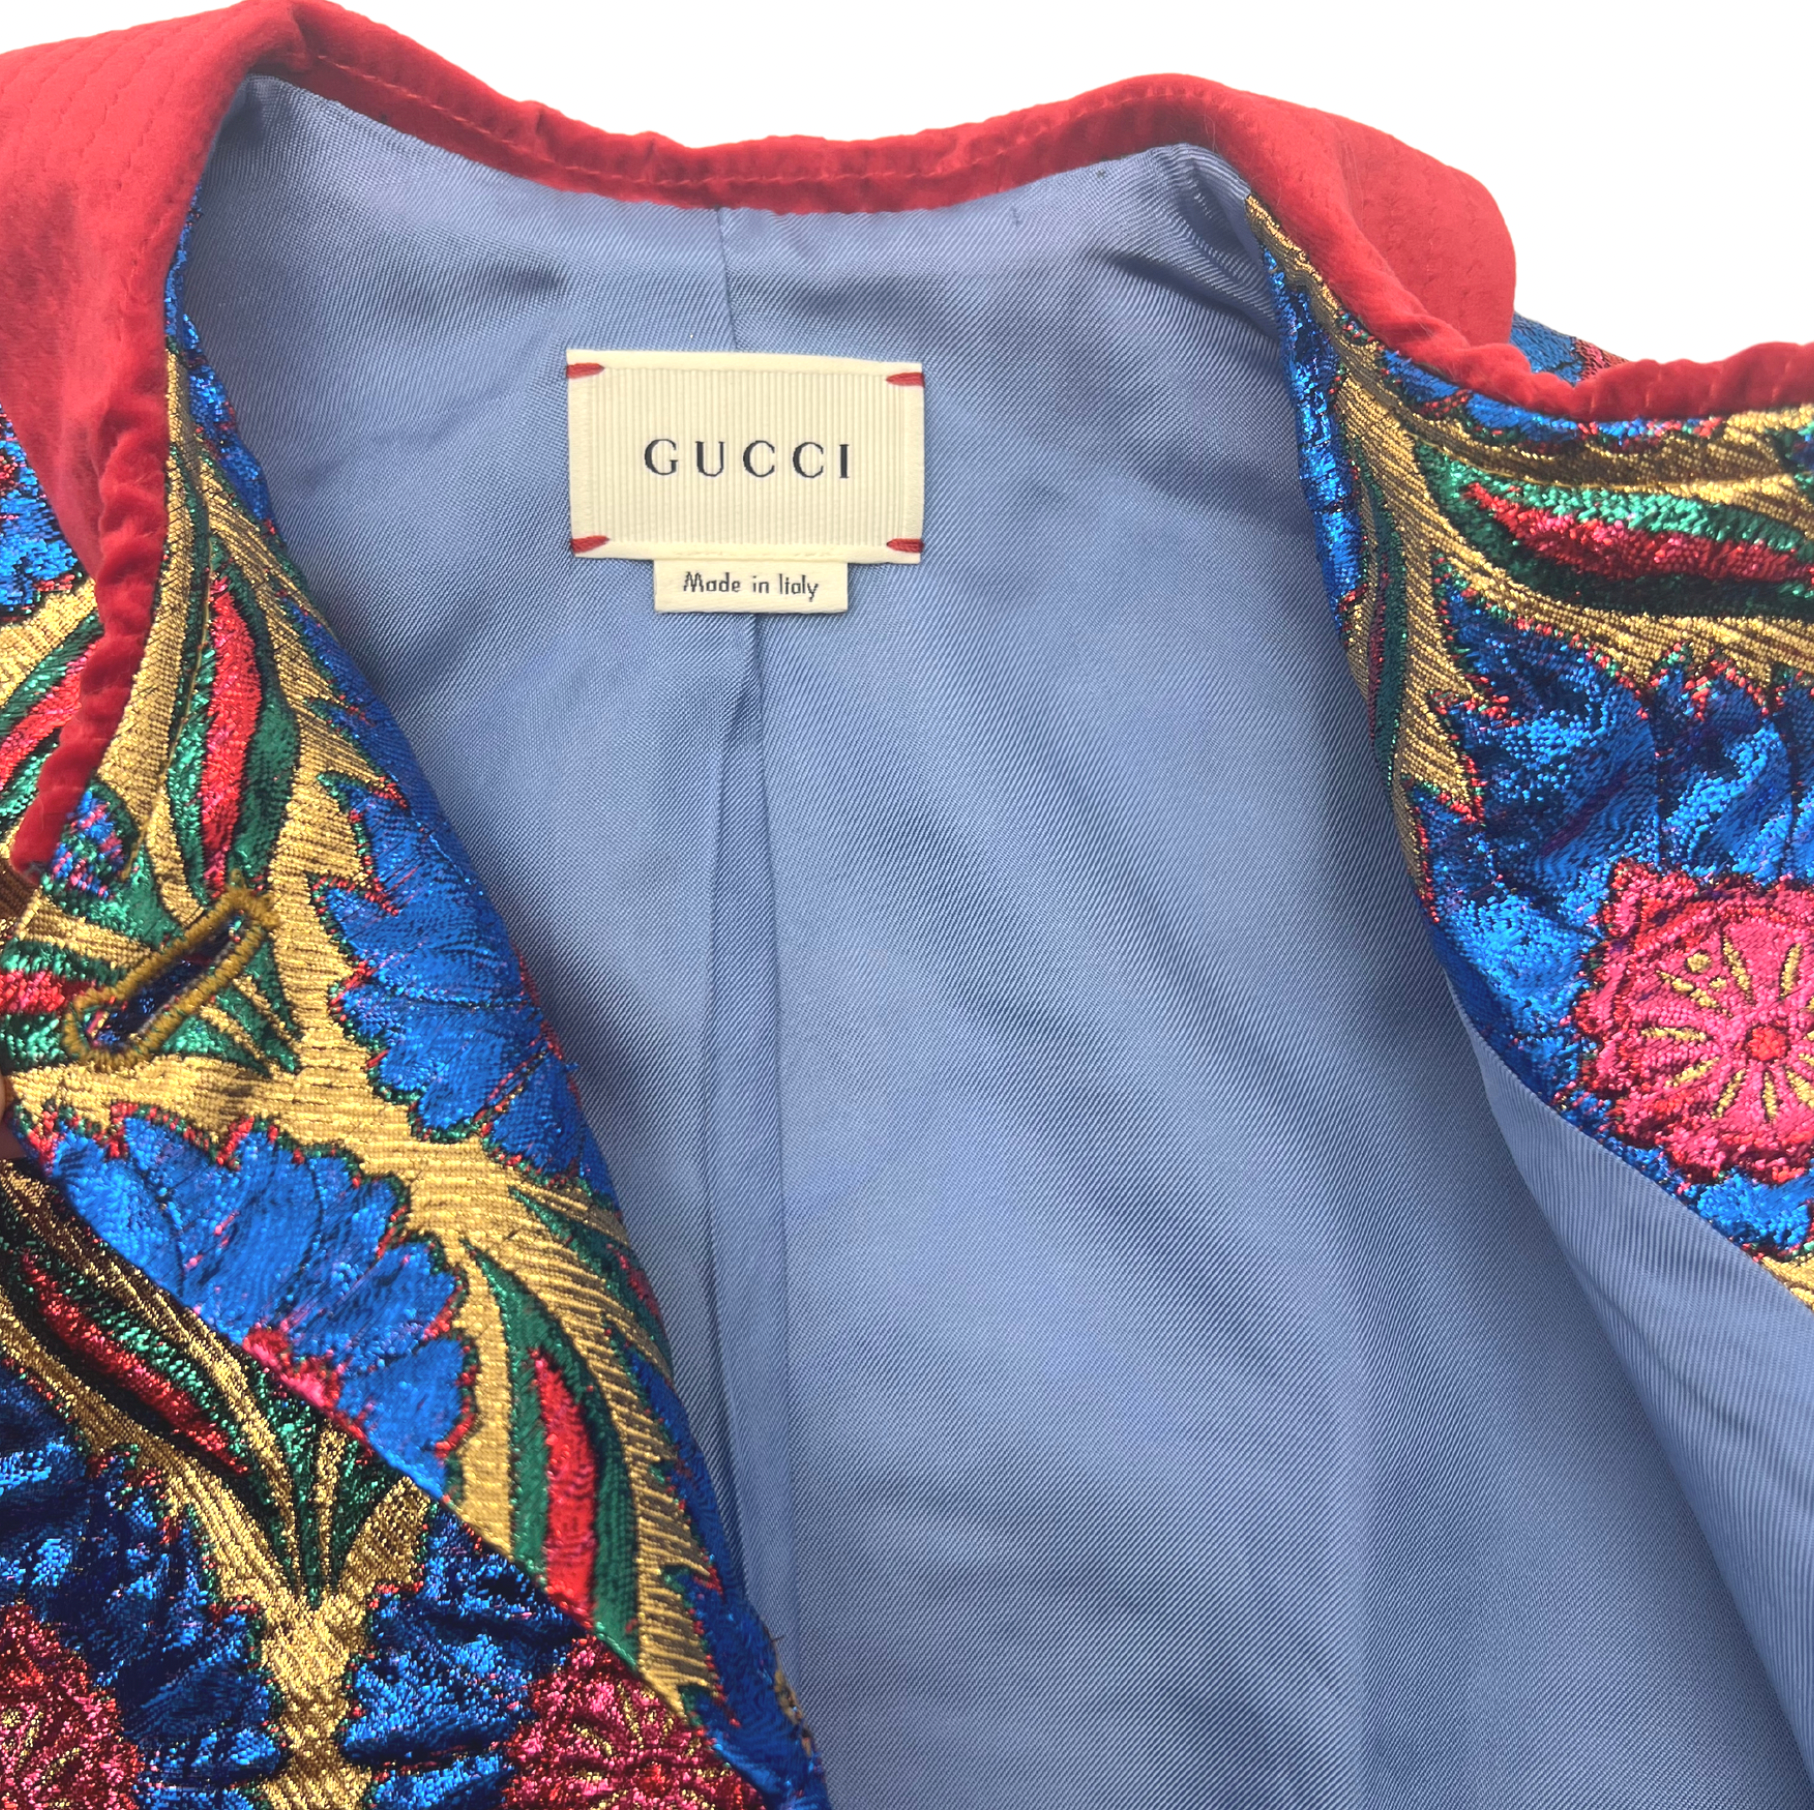 GUCCI - Straight jacket with flower patterns and velvet collar - 3 years old